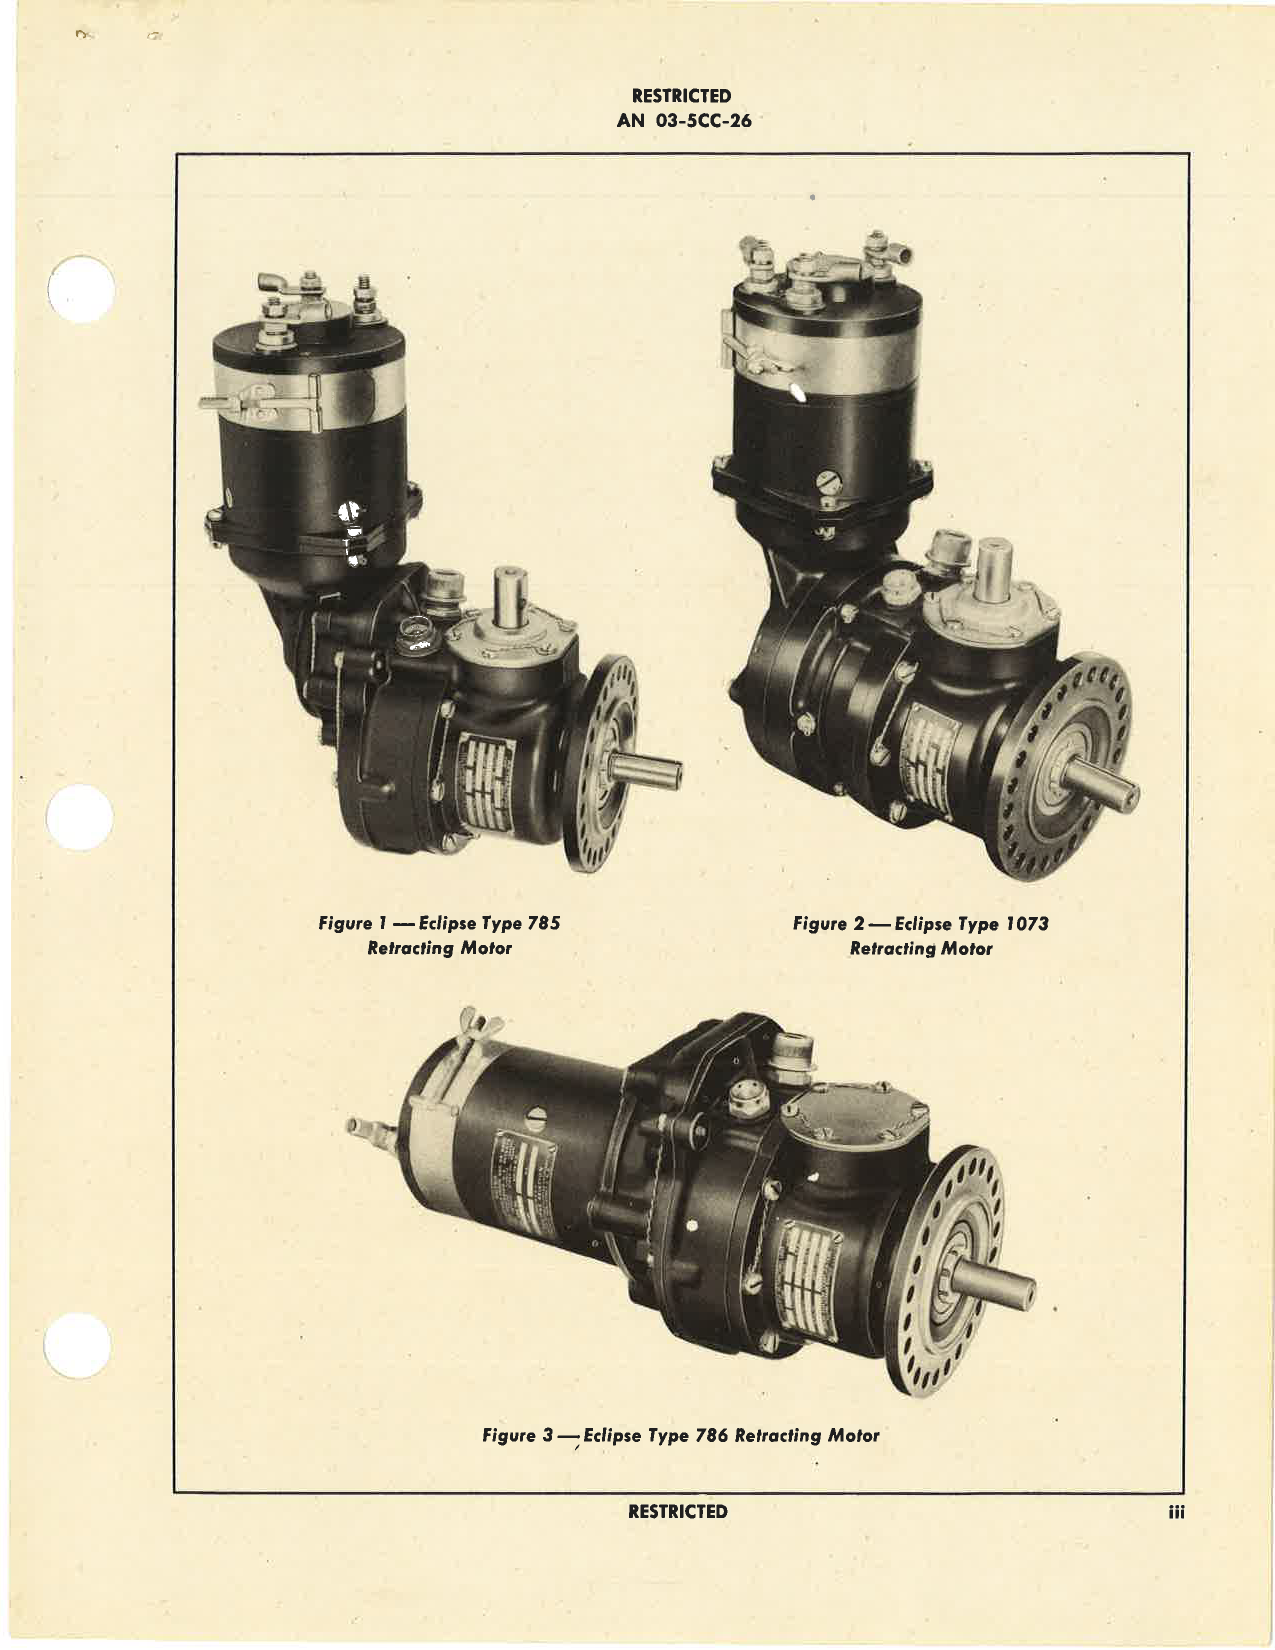 Sample page 5 from AirCorps Library document: Handbook of Instructions with Parts Catalog for Retracting Motors